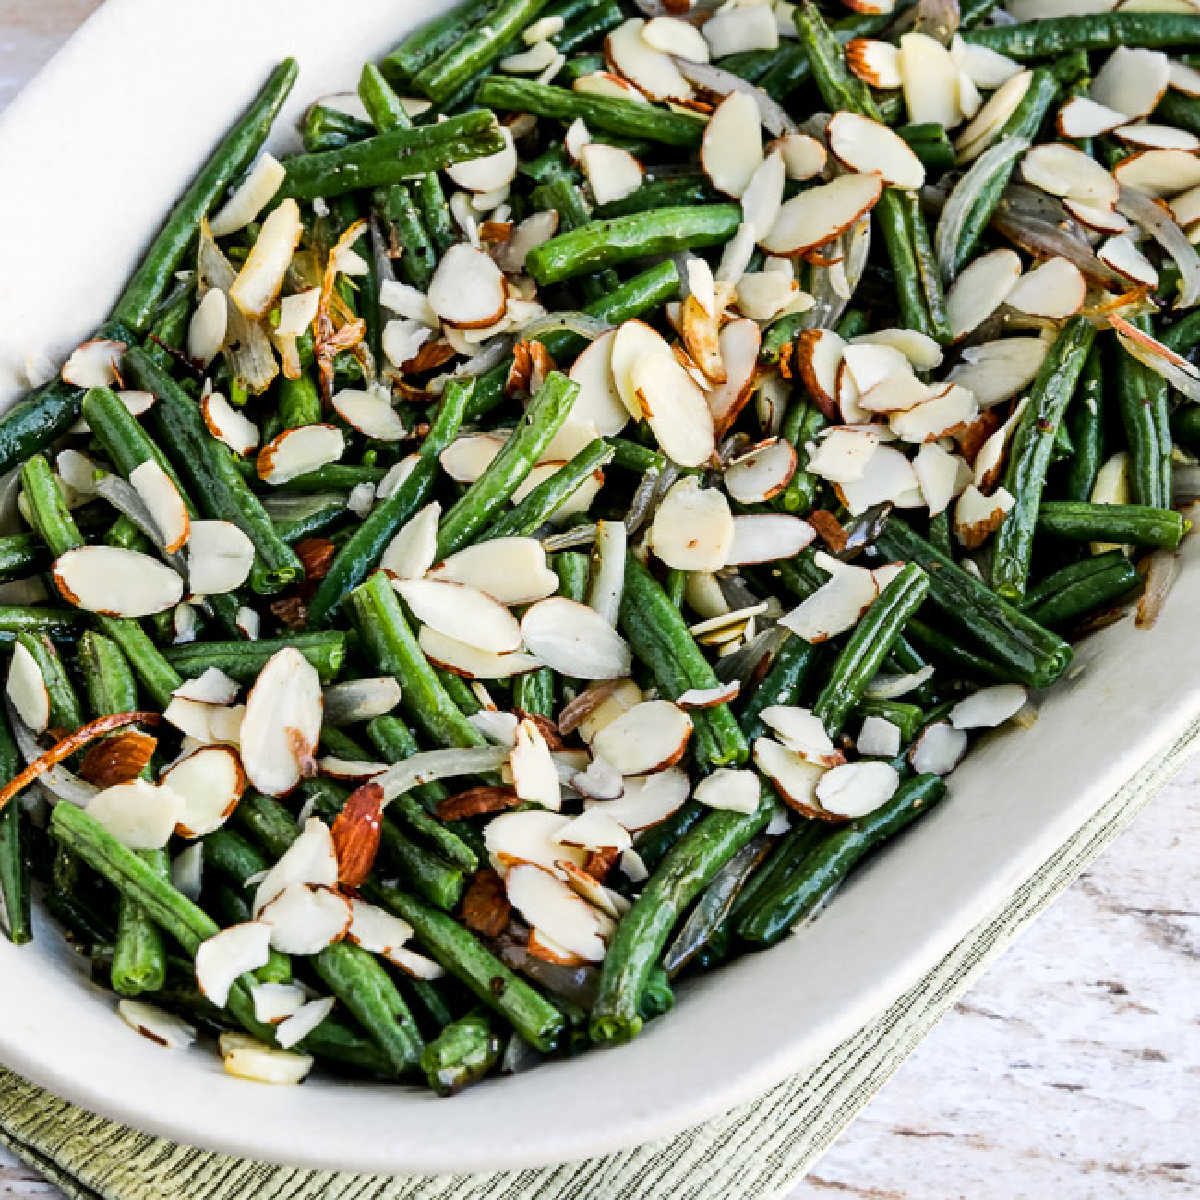 Garlic-Roasted Green Beans with Shallots and Almonds shown on serving plate